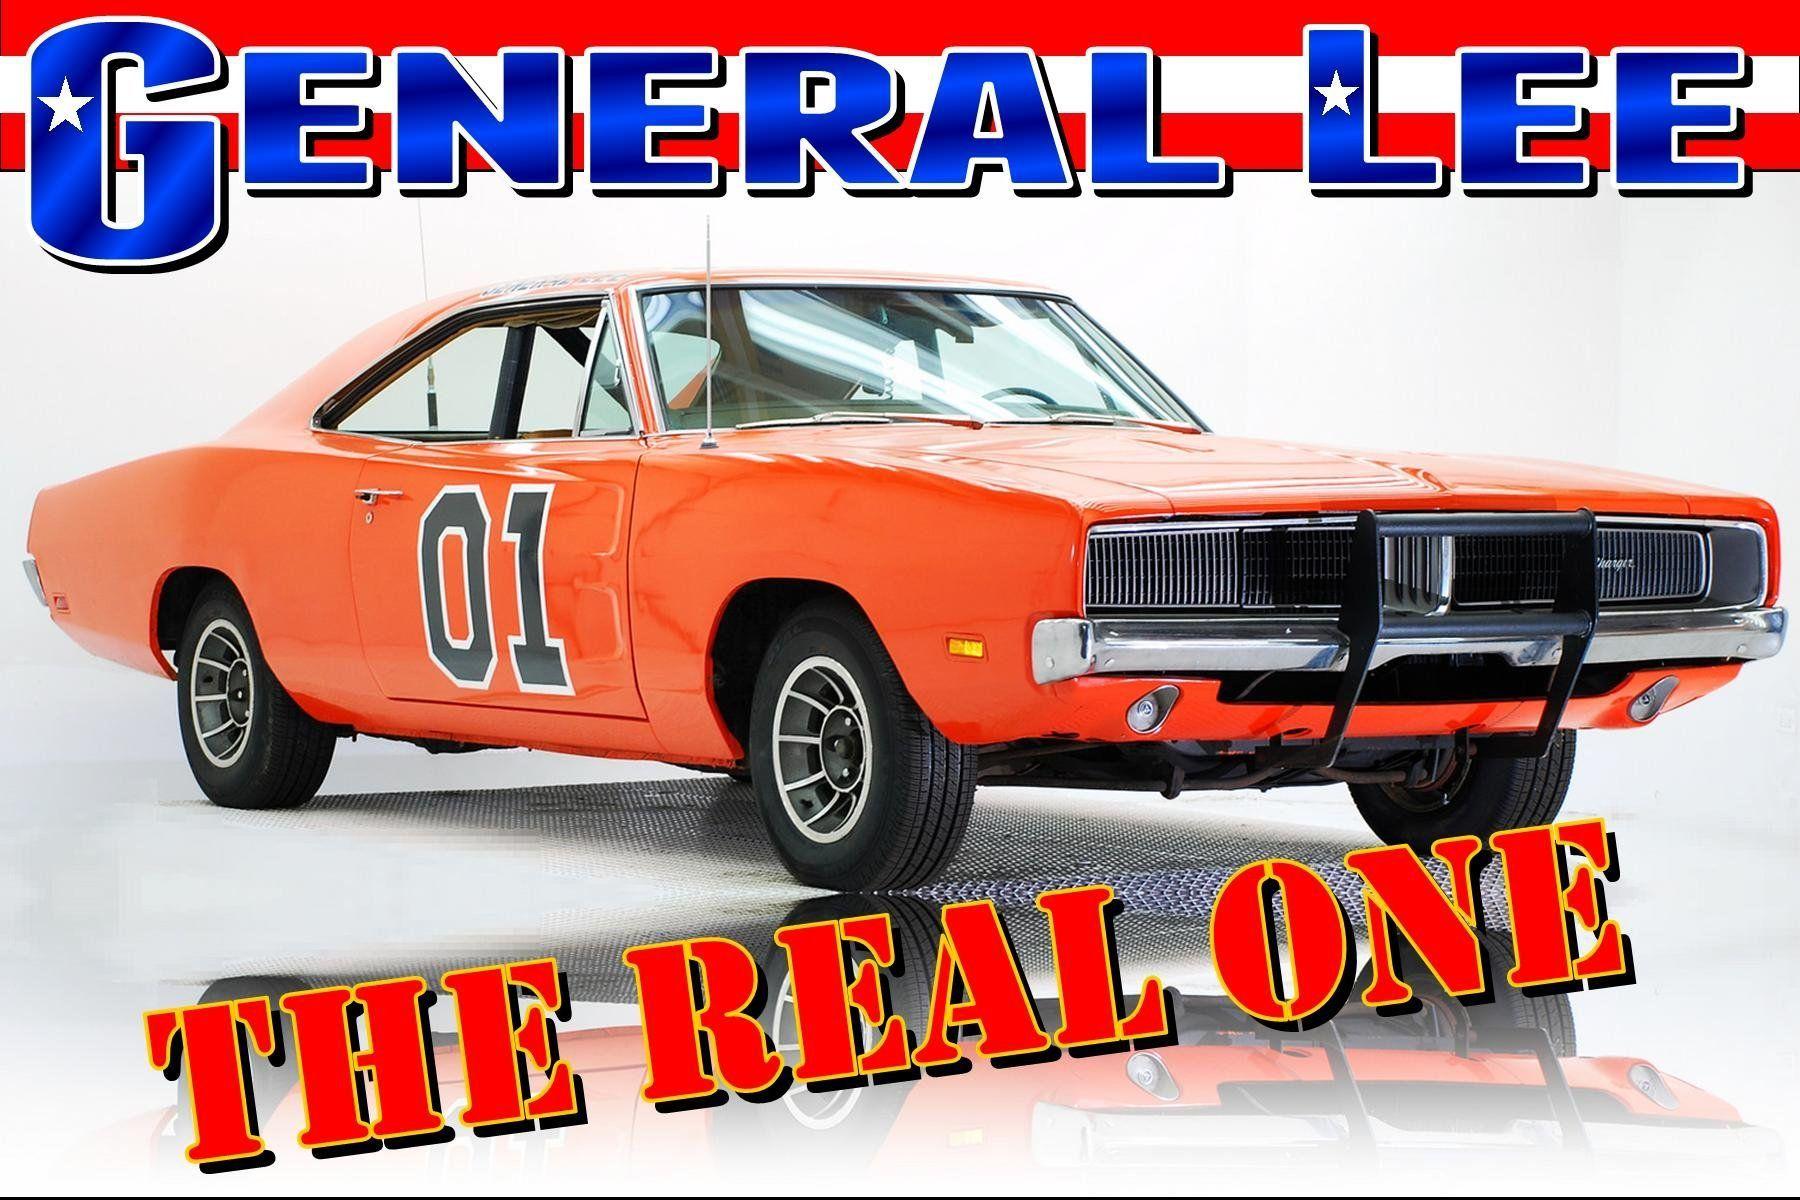 GENERAL LEE dukes hazzard dodge charger muscle hot rod rods